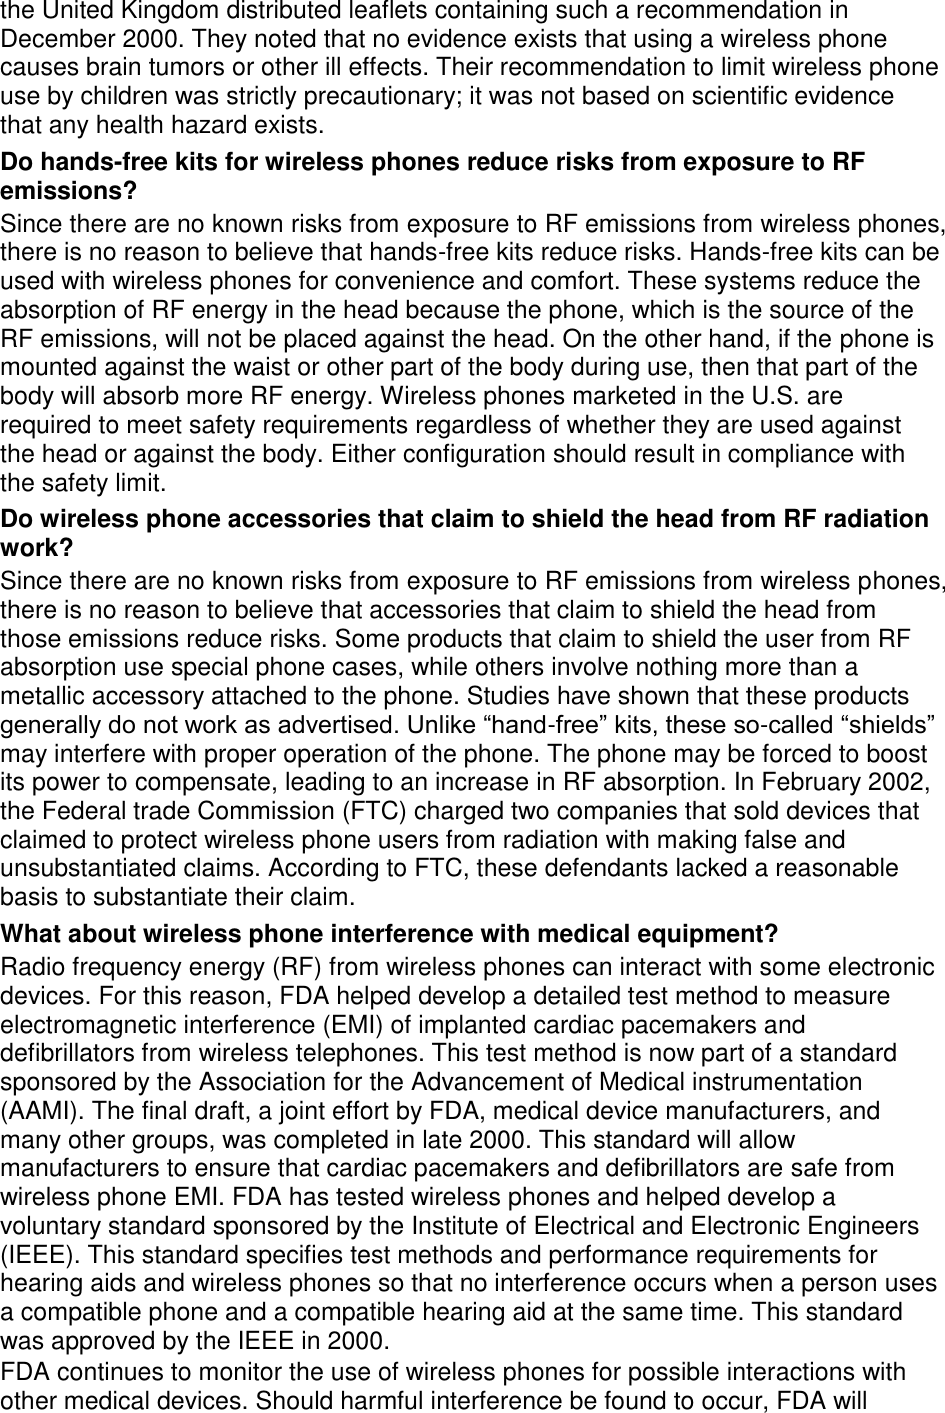 the United Kingdom distributed leaflets containing such a recommendation in December 2000. They noted that no evidence exists that using a wireless phone causes brain tumors or other ill effects. Their recommendation to limit wireless phone use by children was strictly precautionary; it was not based on scientific evidence that any health hazard exists.   Do hands-free kits for wireless phones reduce risks from exposure to RF emissions? Since there are no known risks from exposure to RF emissions from wireless phones, there is no reason to believe that hands-free kits reduce risks. Hands-free kits can be used with wireless phones for convenience and comfort. These systems reduce the absorption of RF energy in the head because the phone, which is the source of the RF emissions, will not be placed against the head. On the other hand, if the phone is mounted against the waist or other part of the body during use, then that part of the body will absorb more RF energy. Wireless phones marketed in the U.S. are required to meet safety requirements regardless of whether they are used against the head or against the body. Either configuration should result in compliance with the safety limit. Do wireless phone accessories that claim to shield the head from RF radiation work? Since there are no known risks from exposure to RF emissions from wireless phones, there is no reason to believe that accessories that claim to shield the head from those emissions reduce risks. Some products that claim to shield the user from RF absorption use special phone cases, while others involve nothing more than a metallic accessory attached to the phone. Studies have shown that these products generally do not work as advertised. Unlike “hand-free” kits, these so-called “shields” may interfere with proper operation of the phone. The phone may be forced to boost its power to compensate, leading to an increase in RF absorption. In February 2002, the Federal trade Commission (FTC) charged two companies that sold devices that claimed to protect wireless phone users from radiation with making false and unsubstantiated claims. According to FTC, these defendants lacked a reasonable basis to substantiate their claim. What about wireless phone interference with medical equipment? Radio frequency energy (RF) from wireless phones can interact with some electronic devices. For this reason, FDA helped develop a detailed test method to measure electromagnetic interference (EMI) of implanted cardiac pacemakers and defibrillators from wireless telephones. This test method is now part of a standard sponsored by the Association for the Advancement of Medical instrumentation (AAMI). The final draft, a joint effort by FDA, medical device manufacturers, and many other groups, was completed in late 2000. This standard will allow manufacturers to ensure that cardiac pacemakers and defibrillators are safe from wireless phone EMI. FDA has tested wireless phones and helped develop a voluntary standard sponsored by the Institute of Electrical and Electronic Engineers (IEEE). This standard specifies test methods and performance requirements for hearing aids and wireless phones so that no interference occurs when a person uses a compatible phone and a compatible hearing aid at the same time. This standard was approved by the IEEE in 2000. FDA continues to monitor the use of wireless phones for possible interactions with other medical devices. Should harmful interference be found to occur, FDA will 